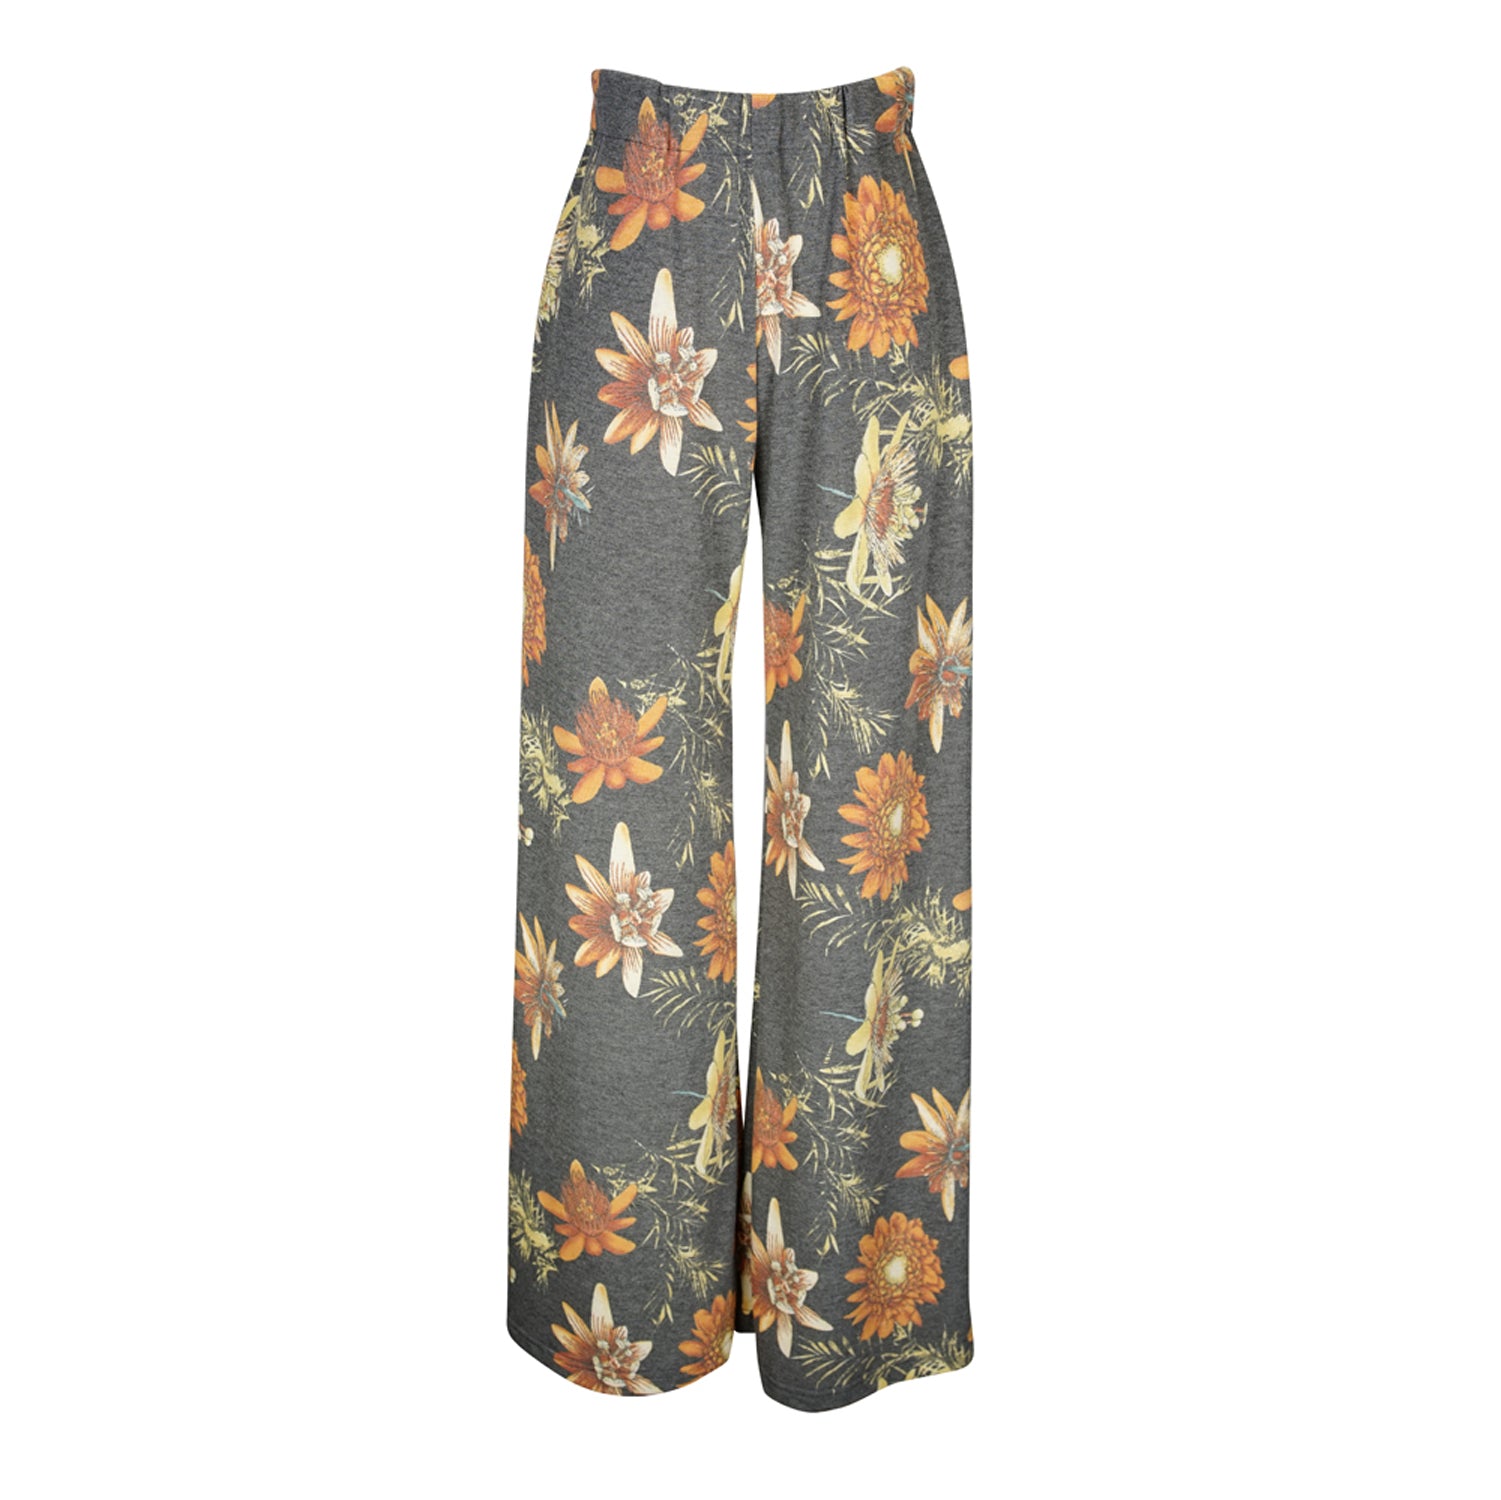 Tunic top and palazzo pant set made from a luxe jersey. Charcoal gray base with orange floral print. Featuring tab sleeves, side slits and an extended obi-style belt on the top, and pockets, elastic waist and a soft hidden drawstring on the bottoms.